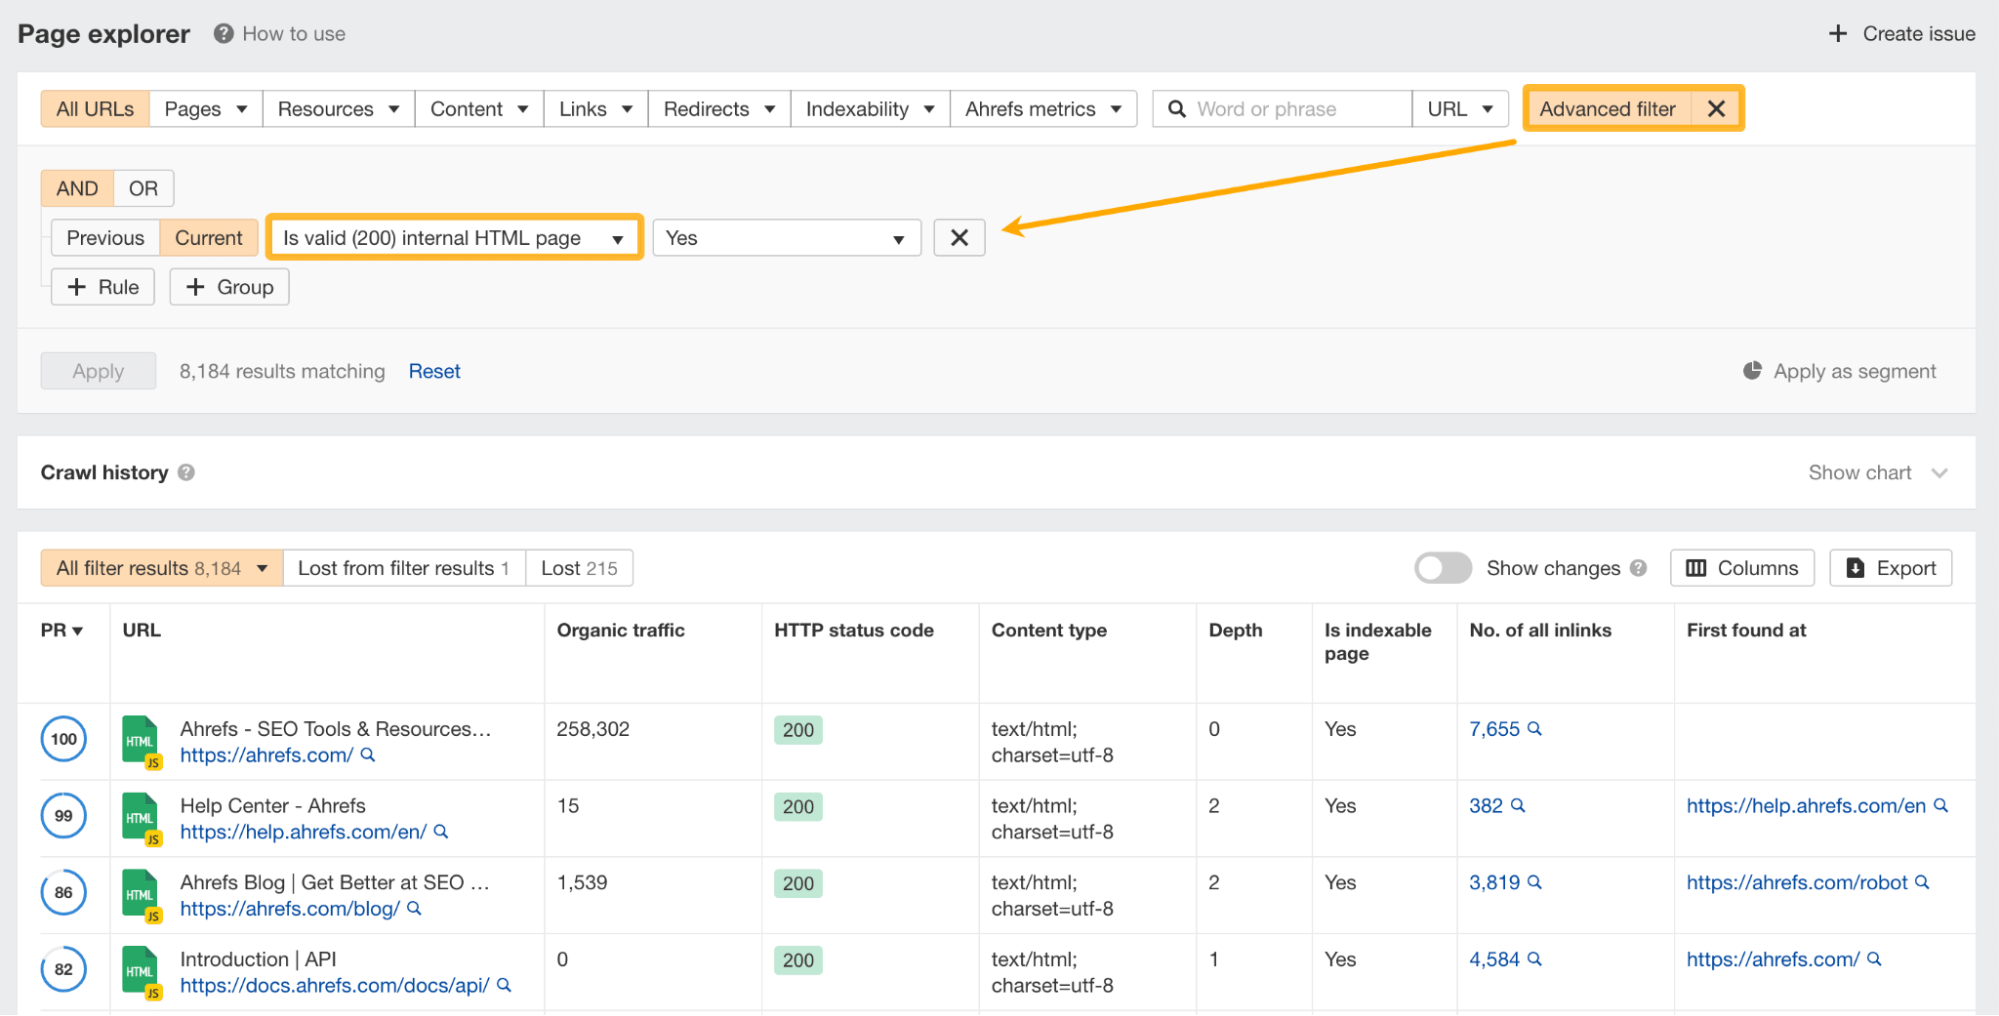 Advanced filter in Page explorer report, via Ahrefs' Site Audit